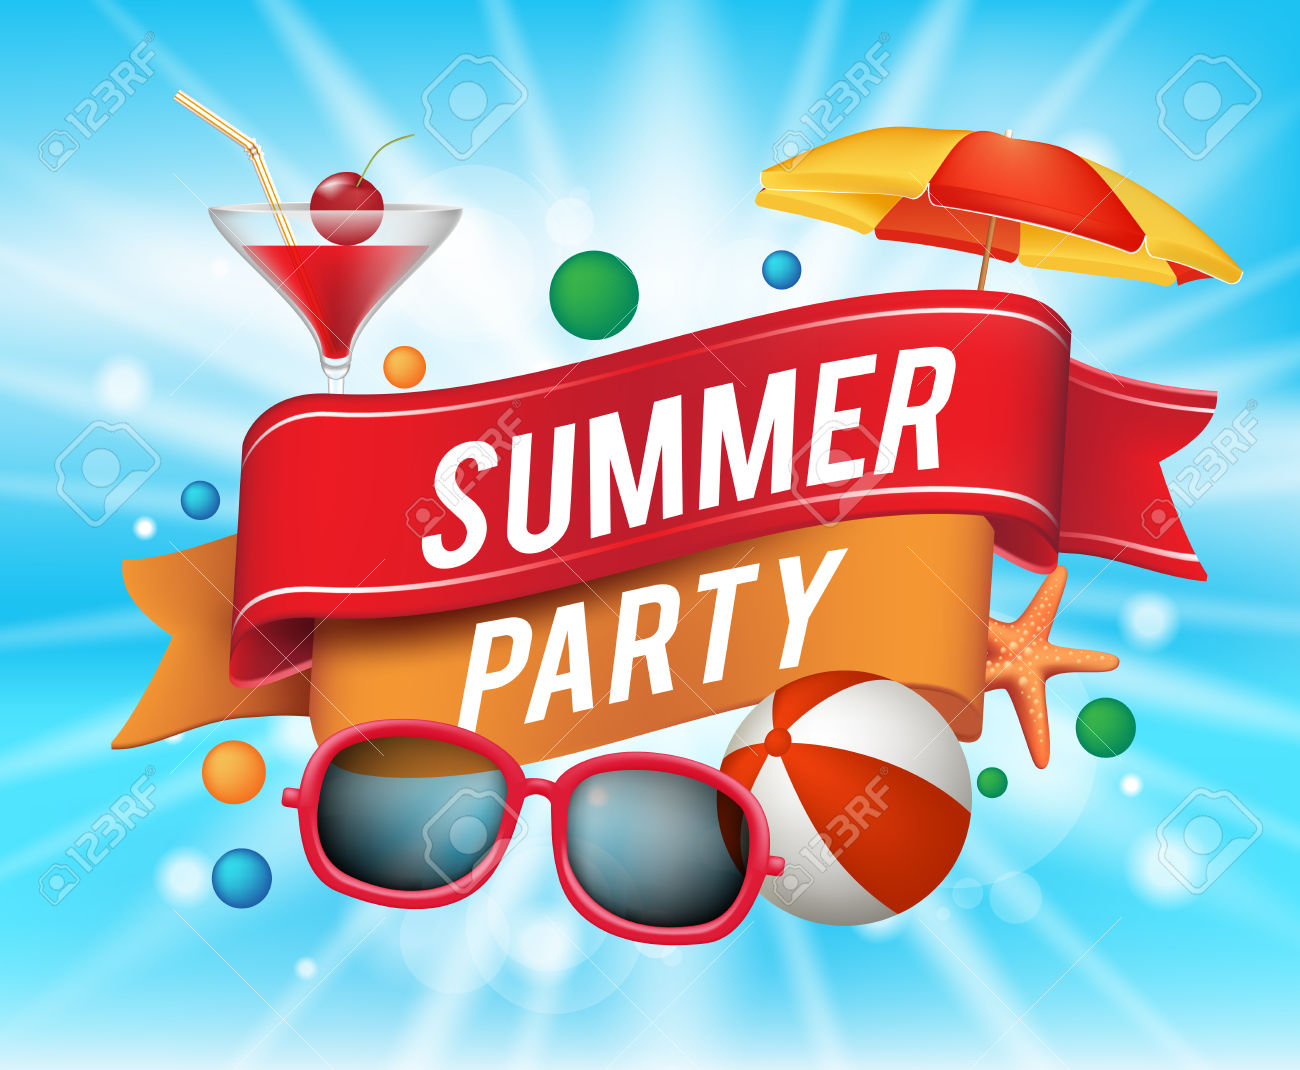 clipart summer party - photo #29